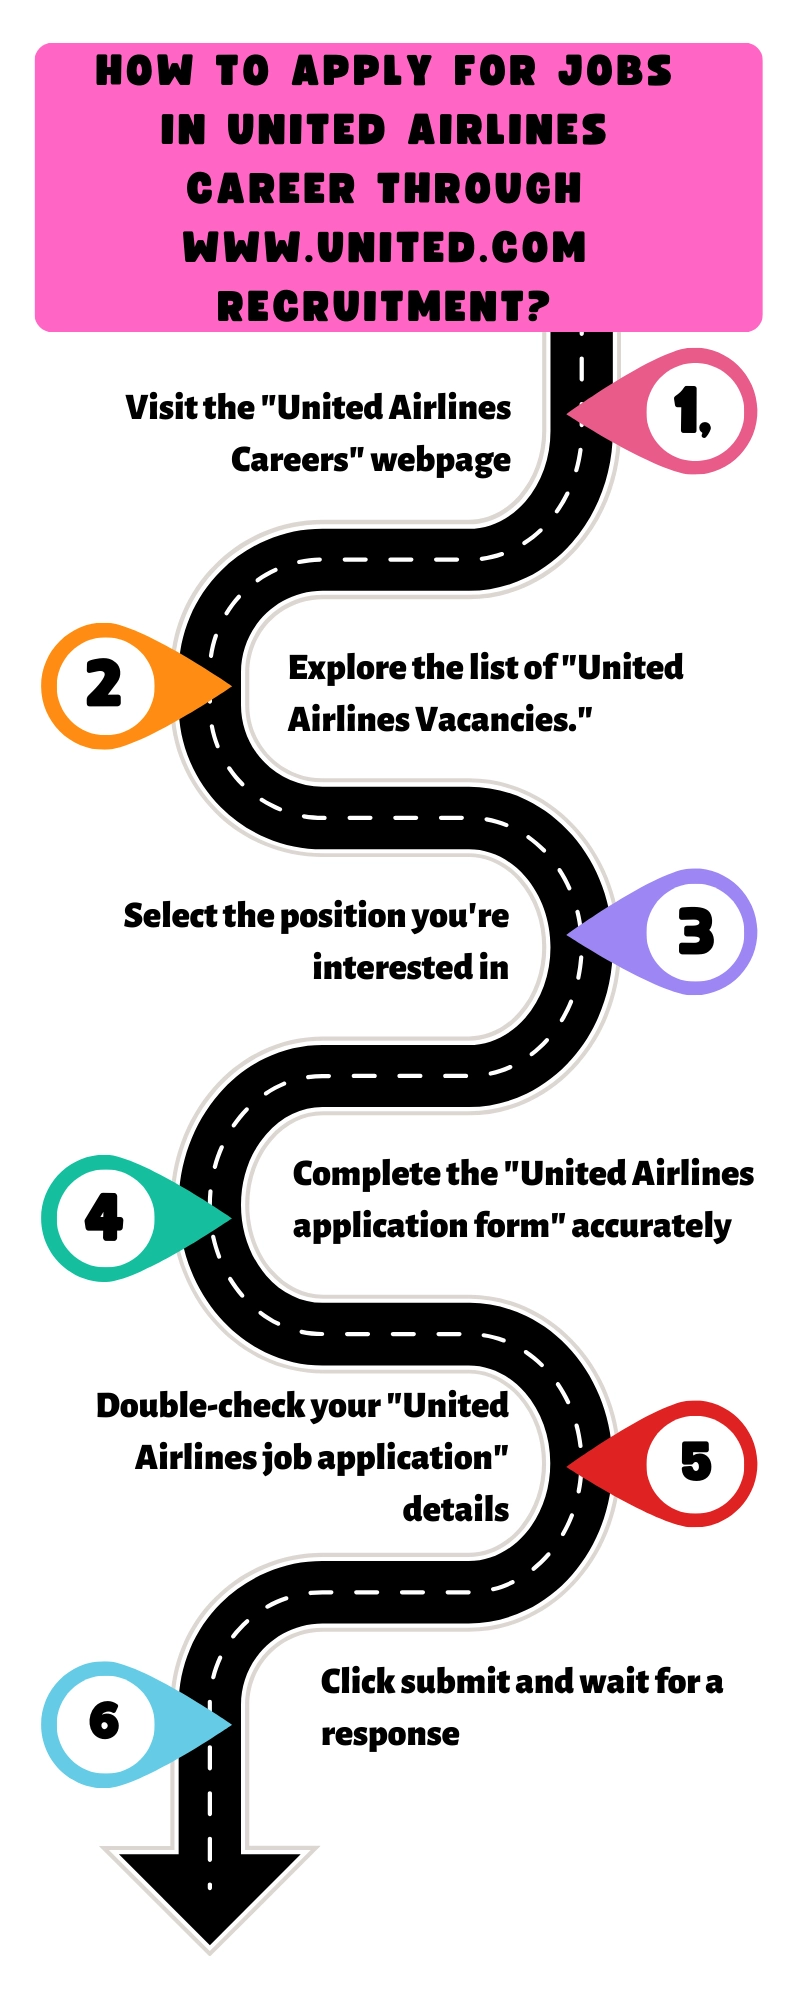 How to Apply for Jobs in United Airlines Career through www.united.com recruitment?